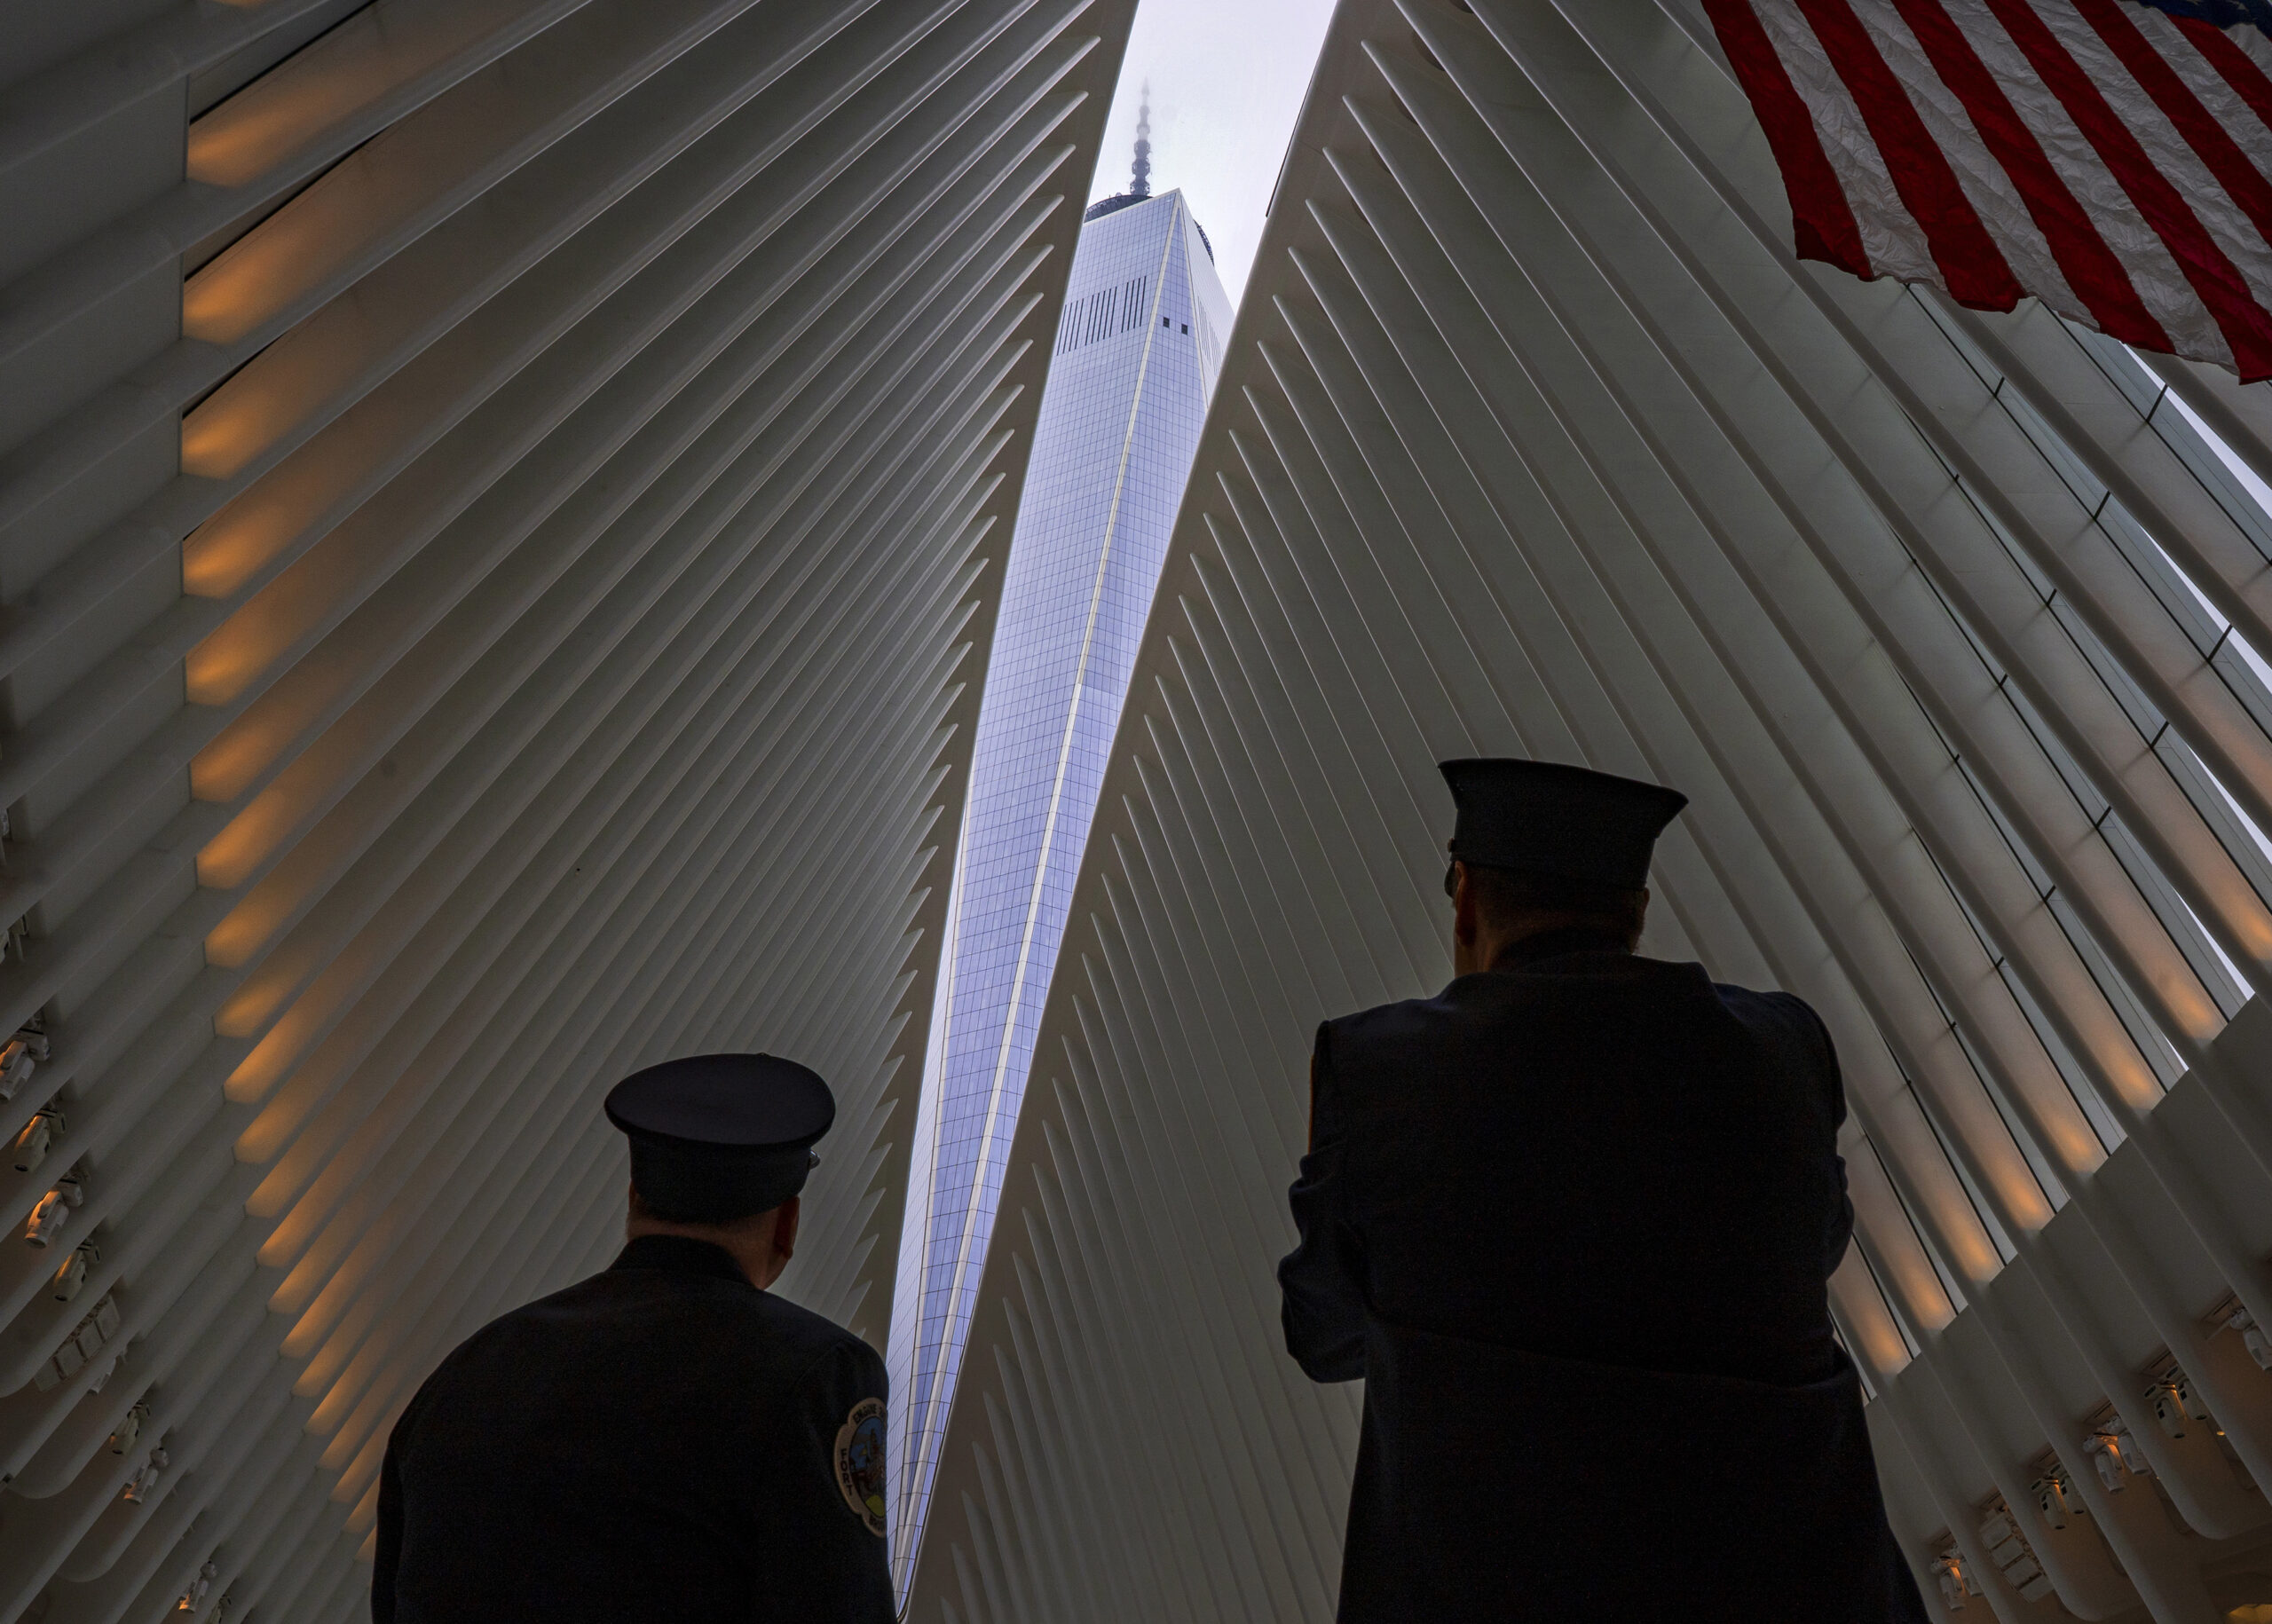 Two members of the New York City fire department look towards One World Trade Center